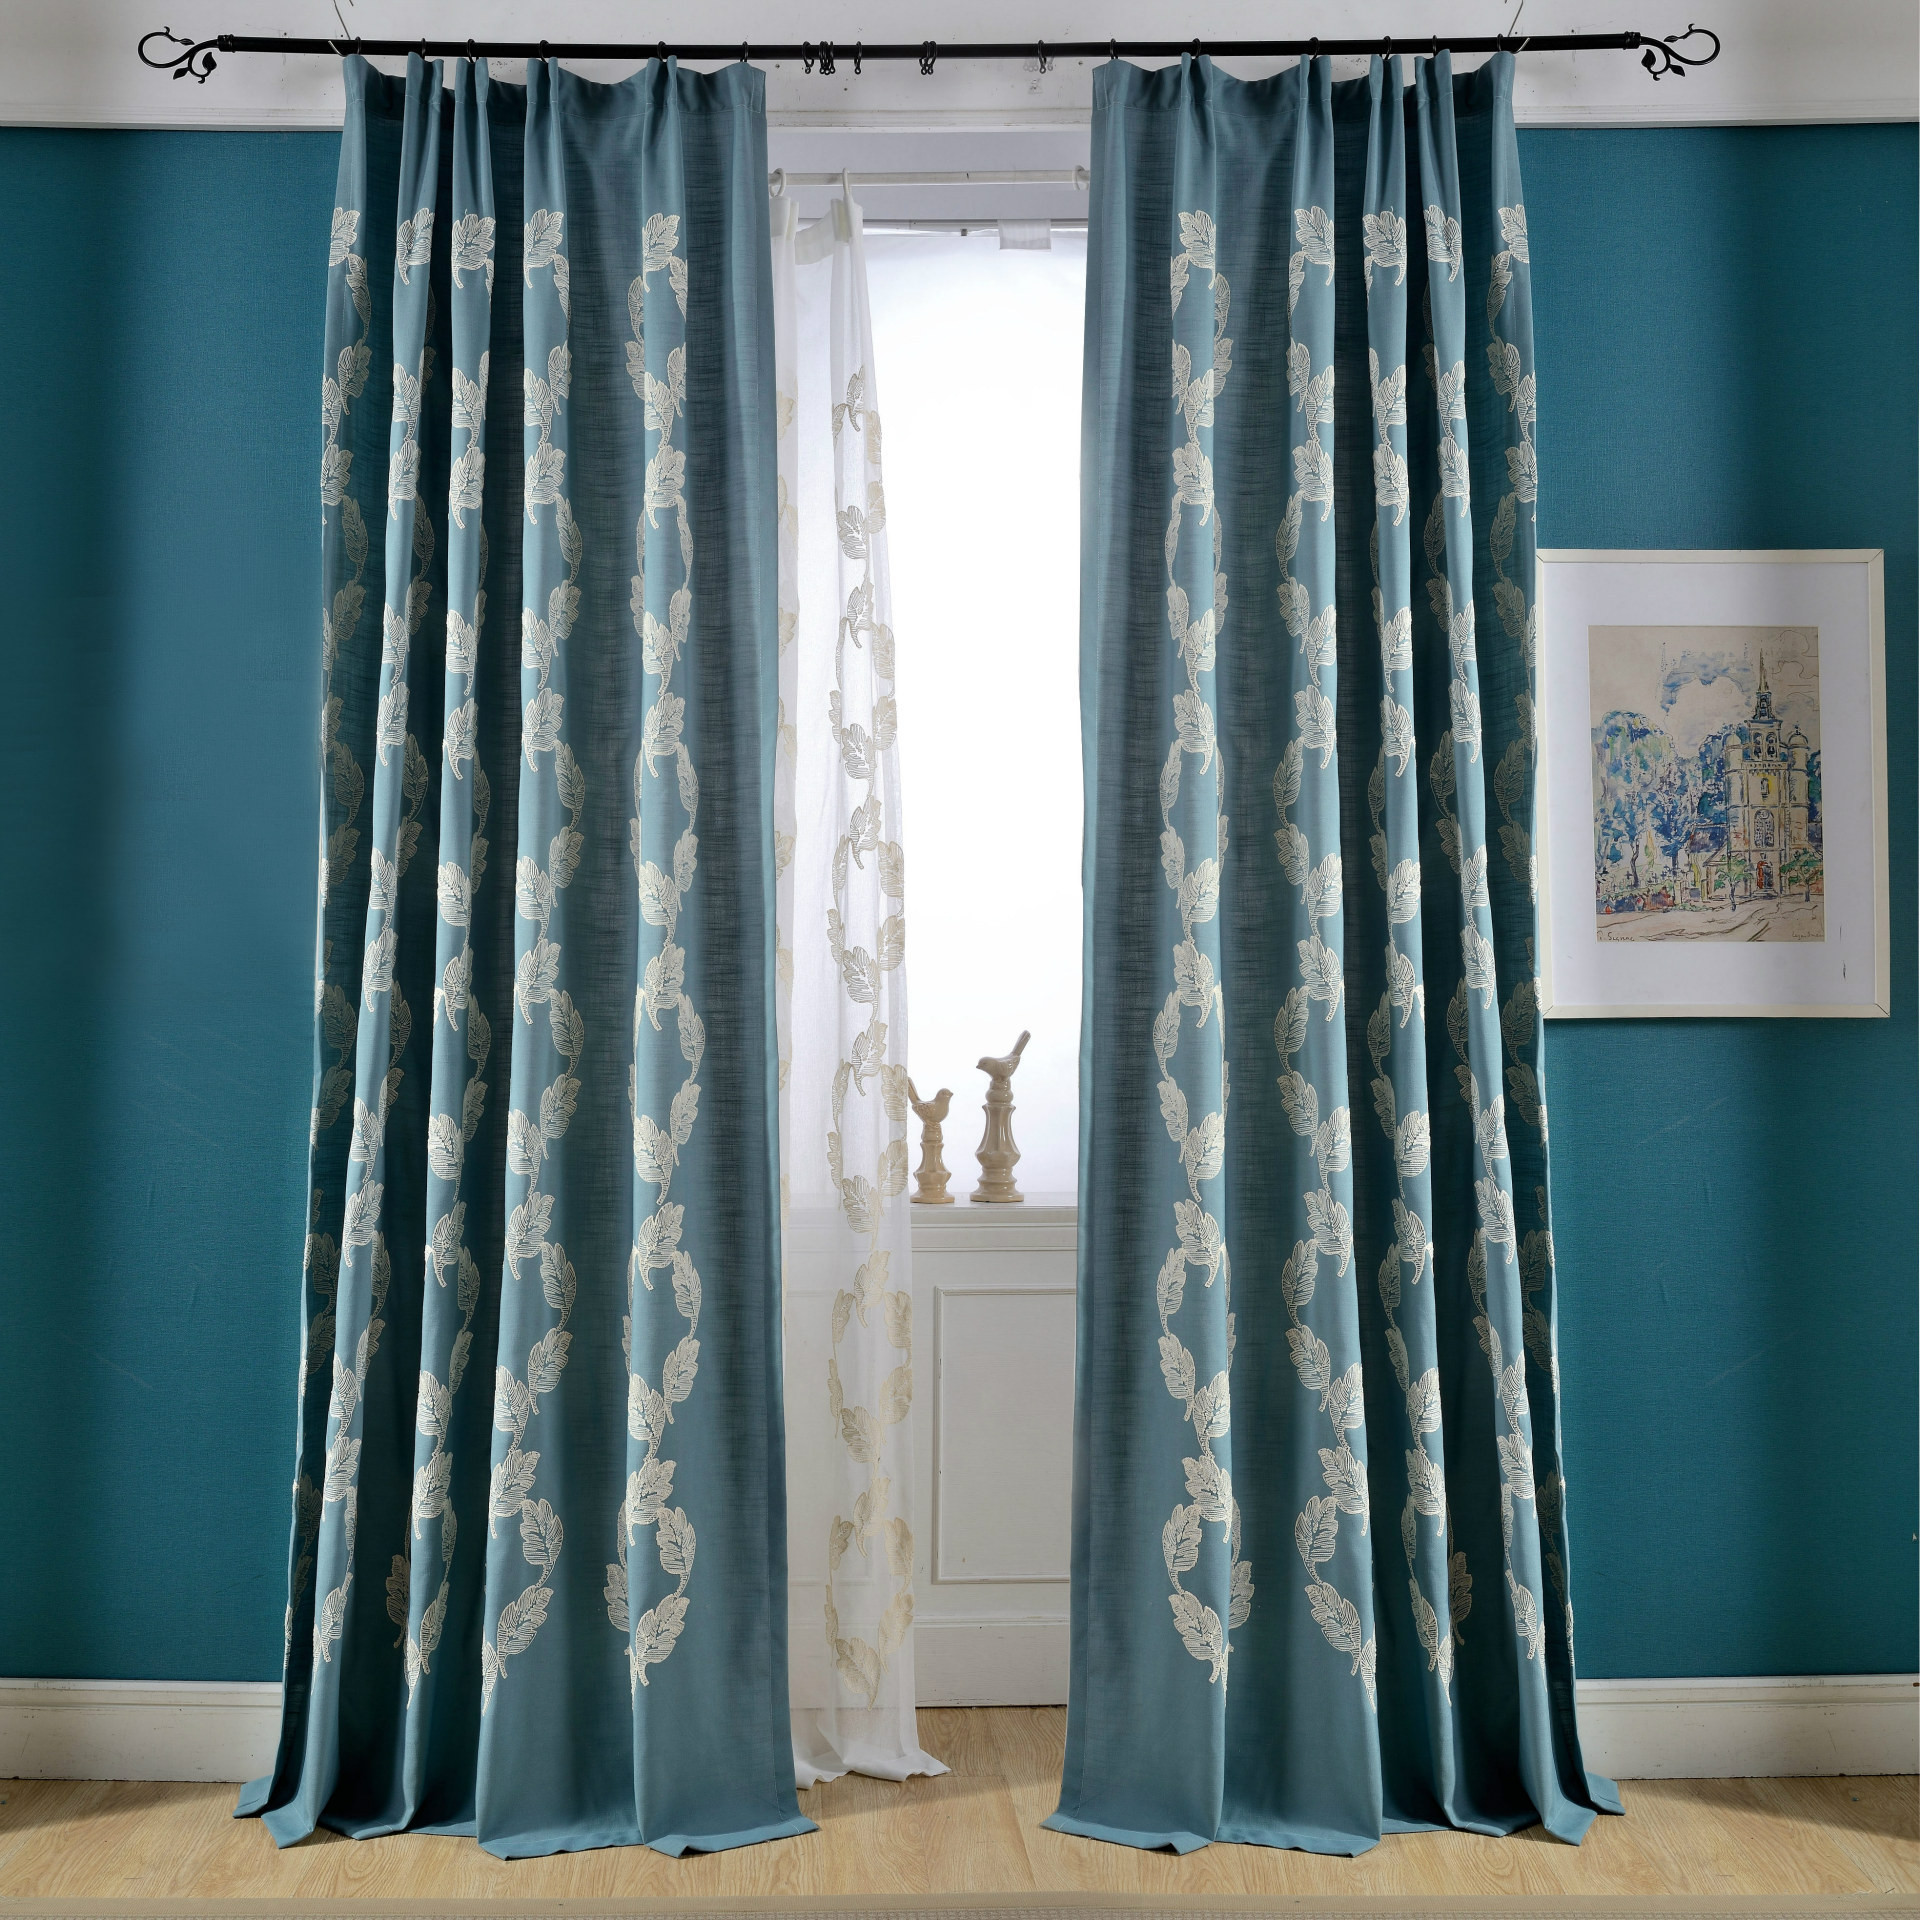 Living Room Country Curtains
 Blue Leaf Embroidery Linen Cotton Blend Country Curtains